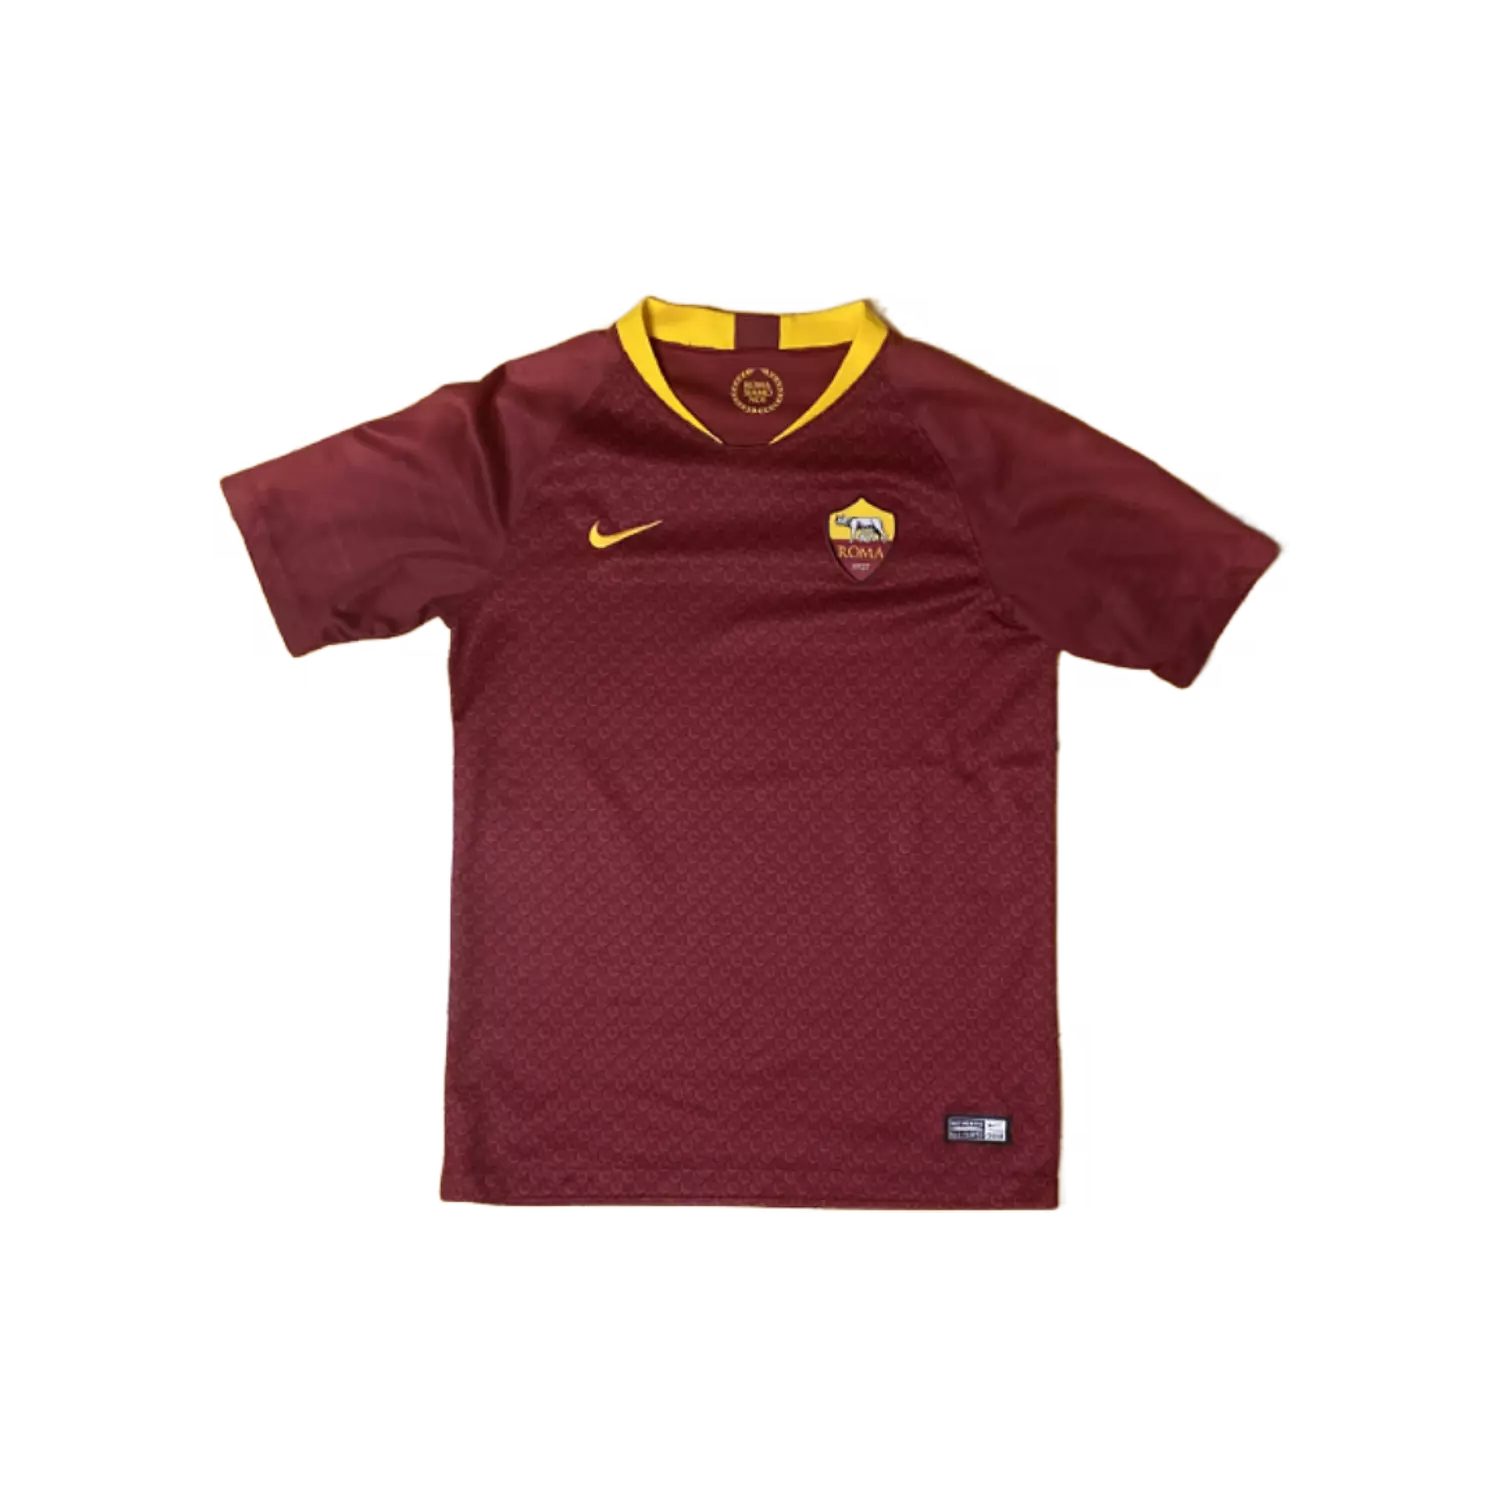 AS Roma 2018/19 Home Kit (LB)  hover image